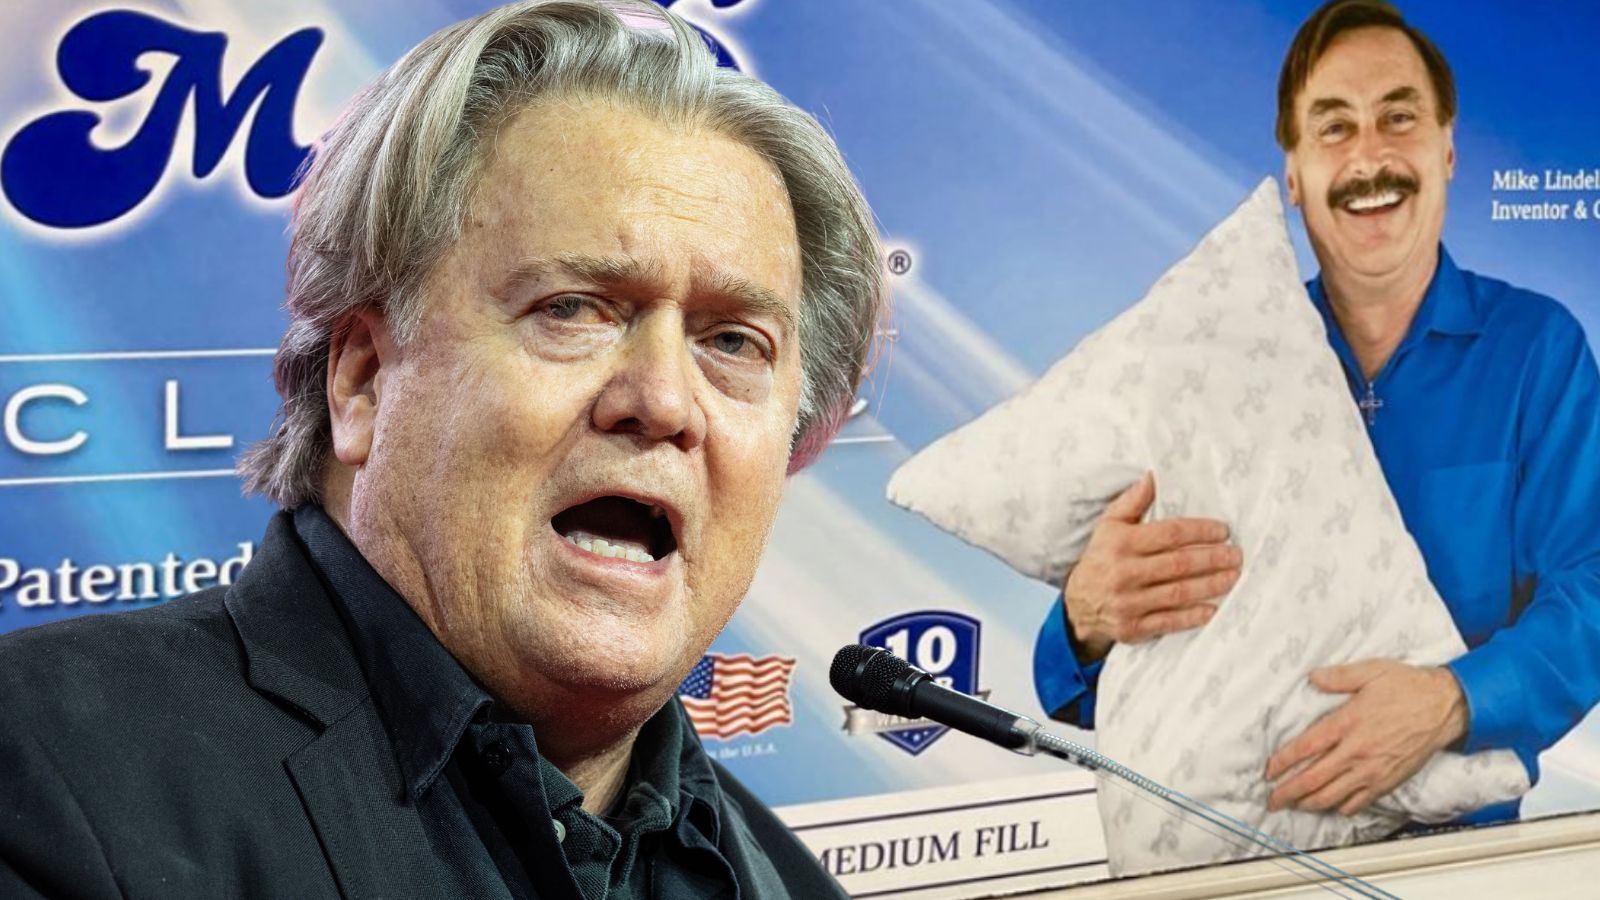 “We Can’t Pay Lawyers”: Steve Bannon Attempts To Save MyPillow CEO From Financial Ruin